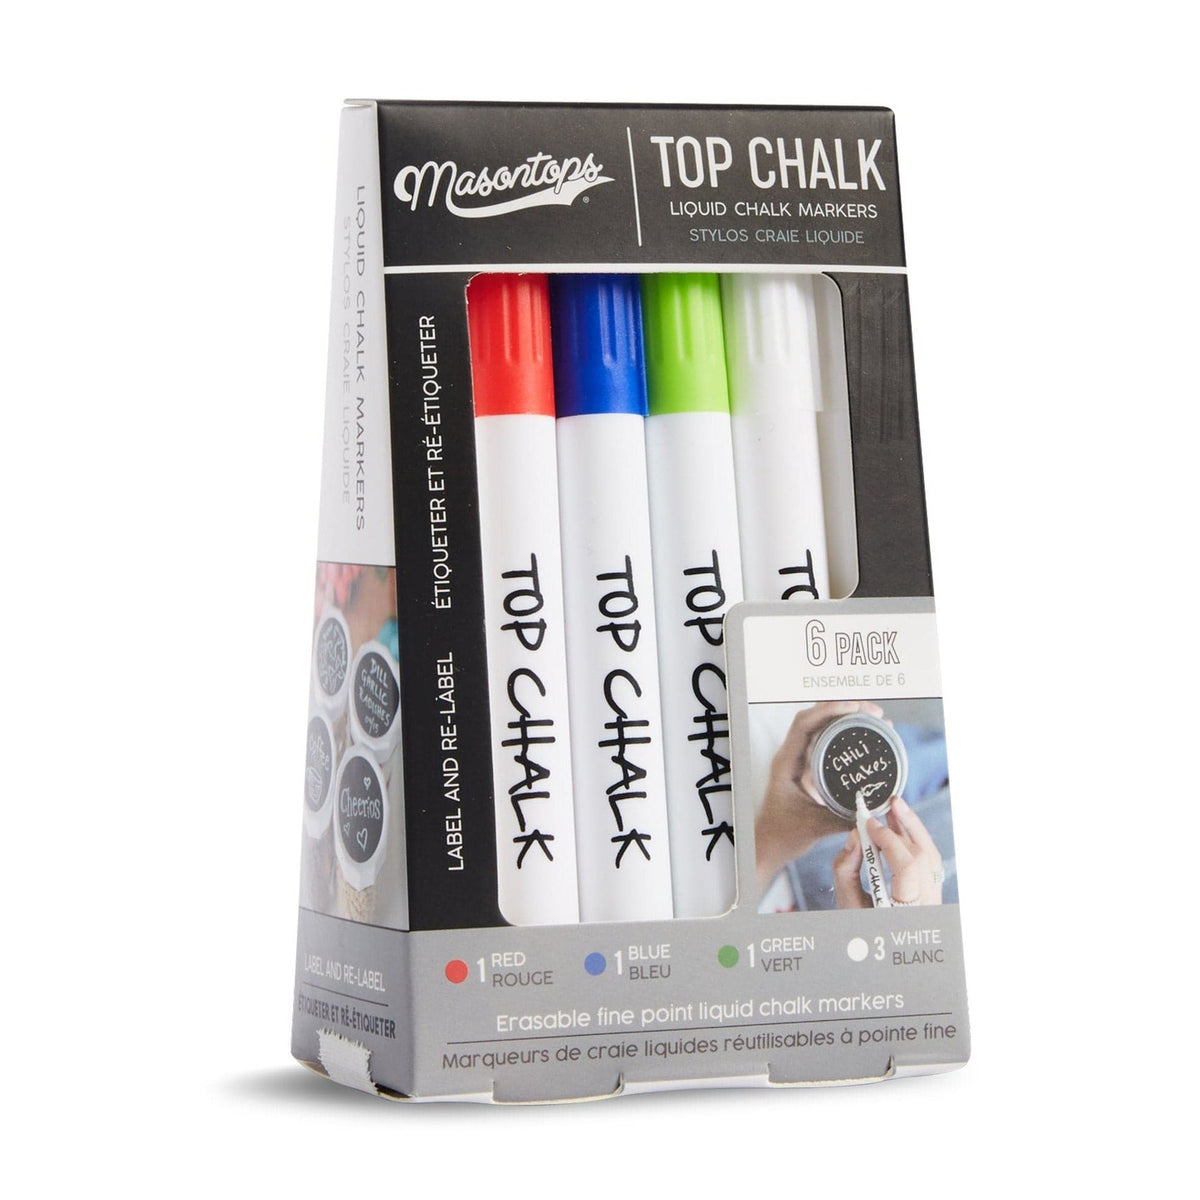 A box of  Masontops 6 pack liquid chalk markers of colors: red, blue, green, and white.  Erasable fine point liquid chalk markers.